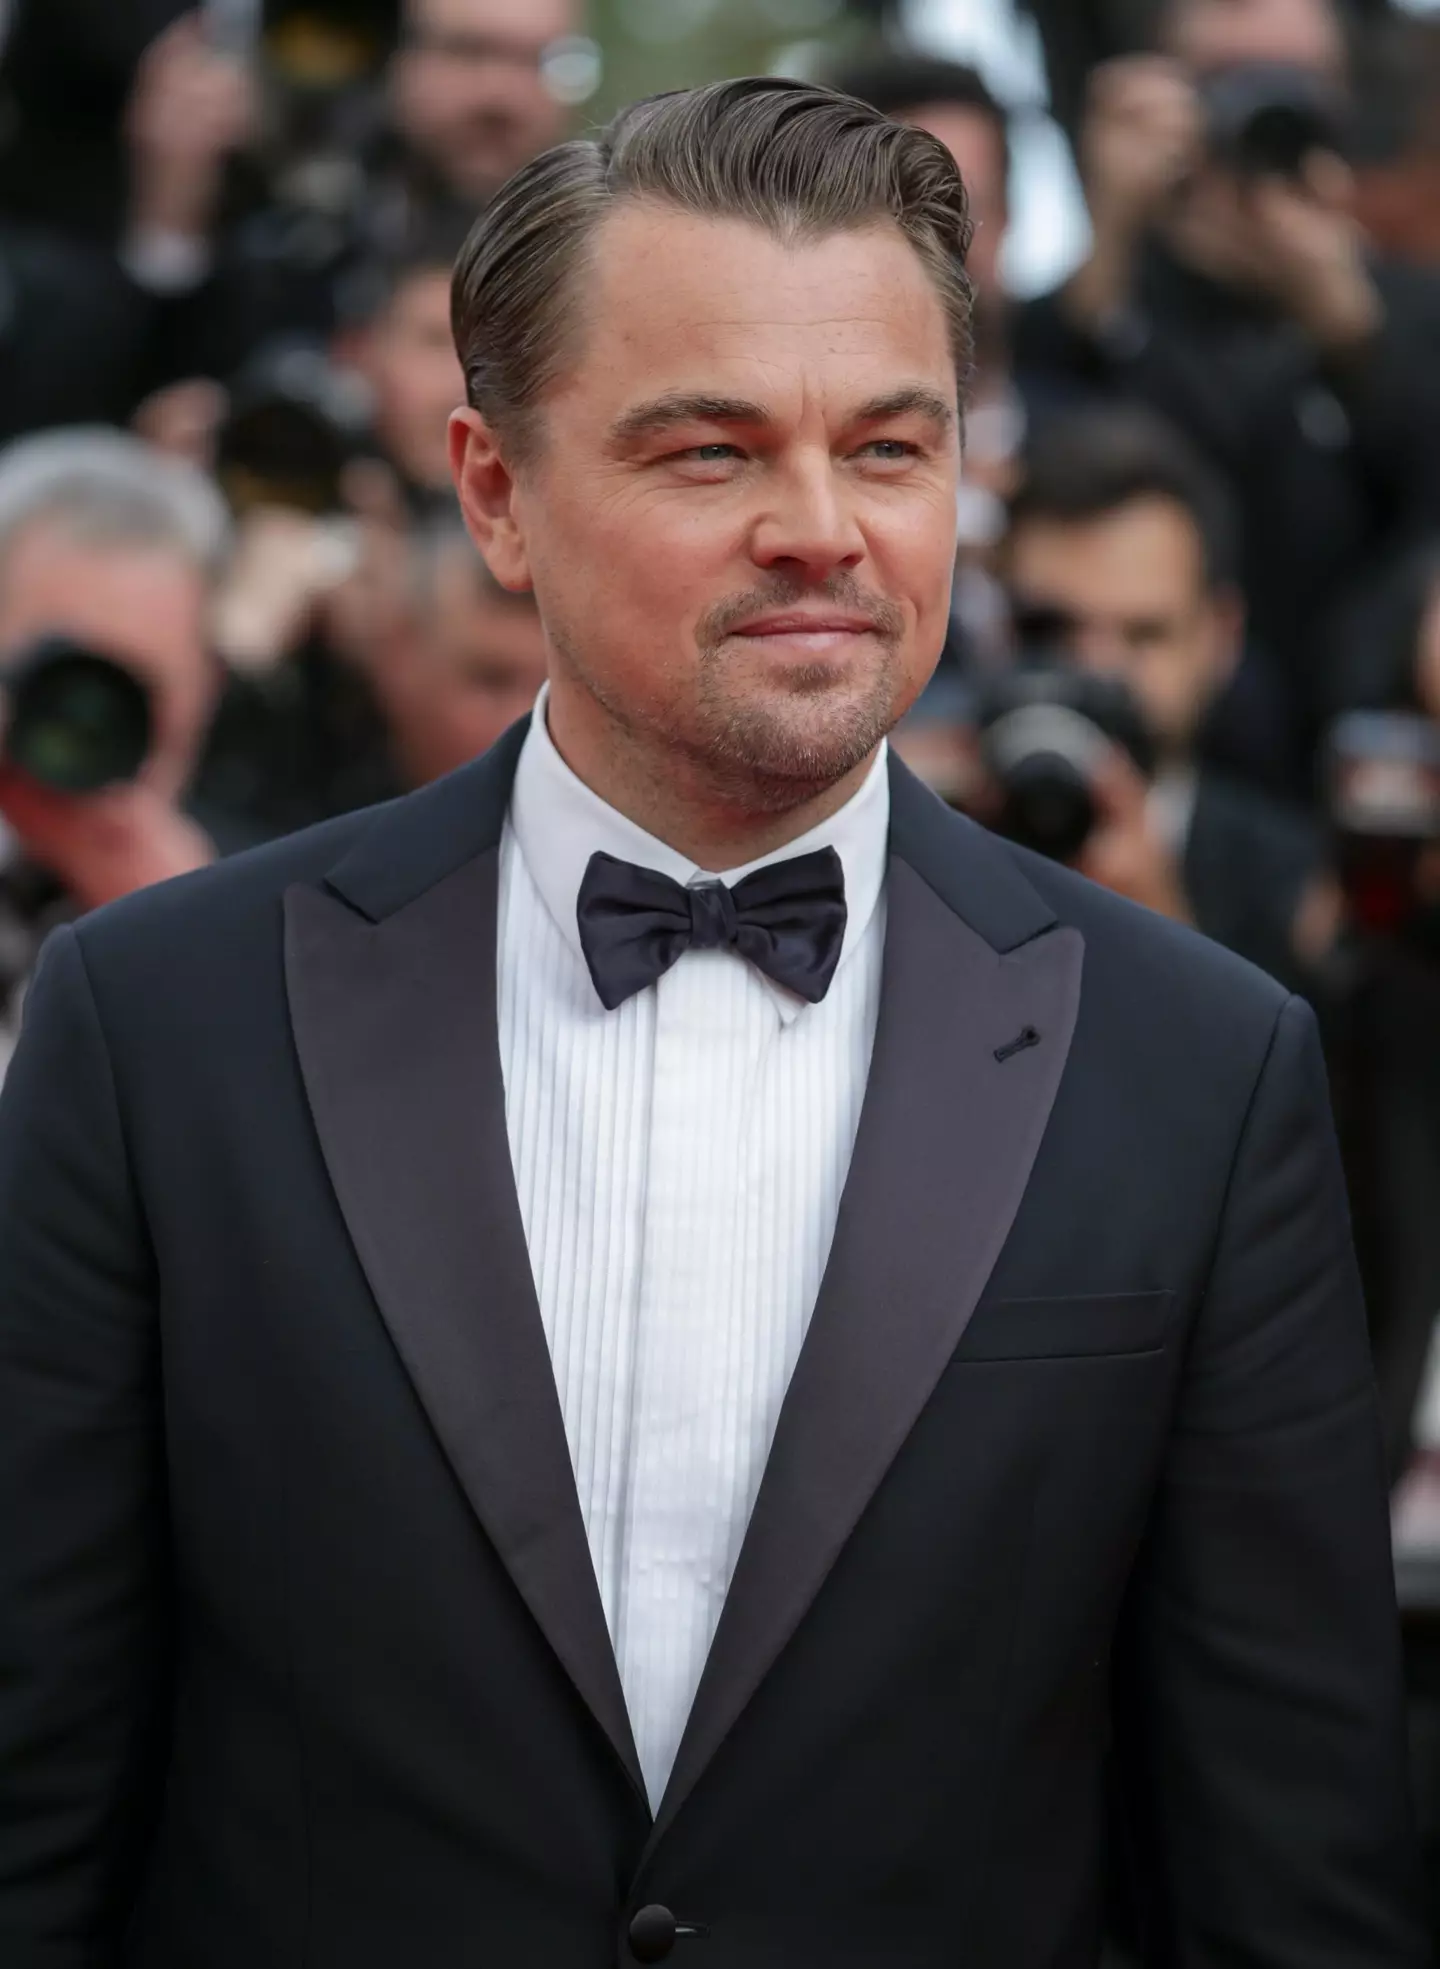 Leonardo DiCaprio's dating choices are starting to raise more eyebrows than usual.